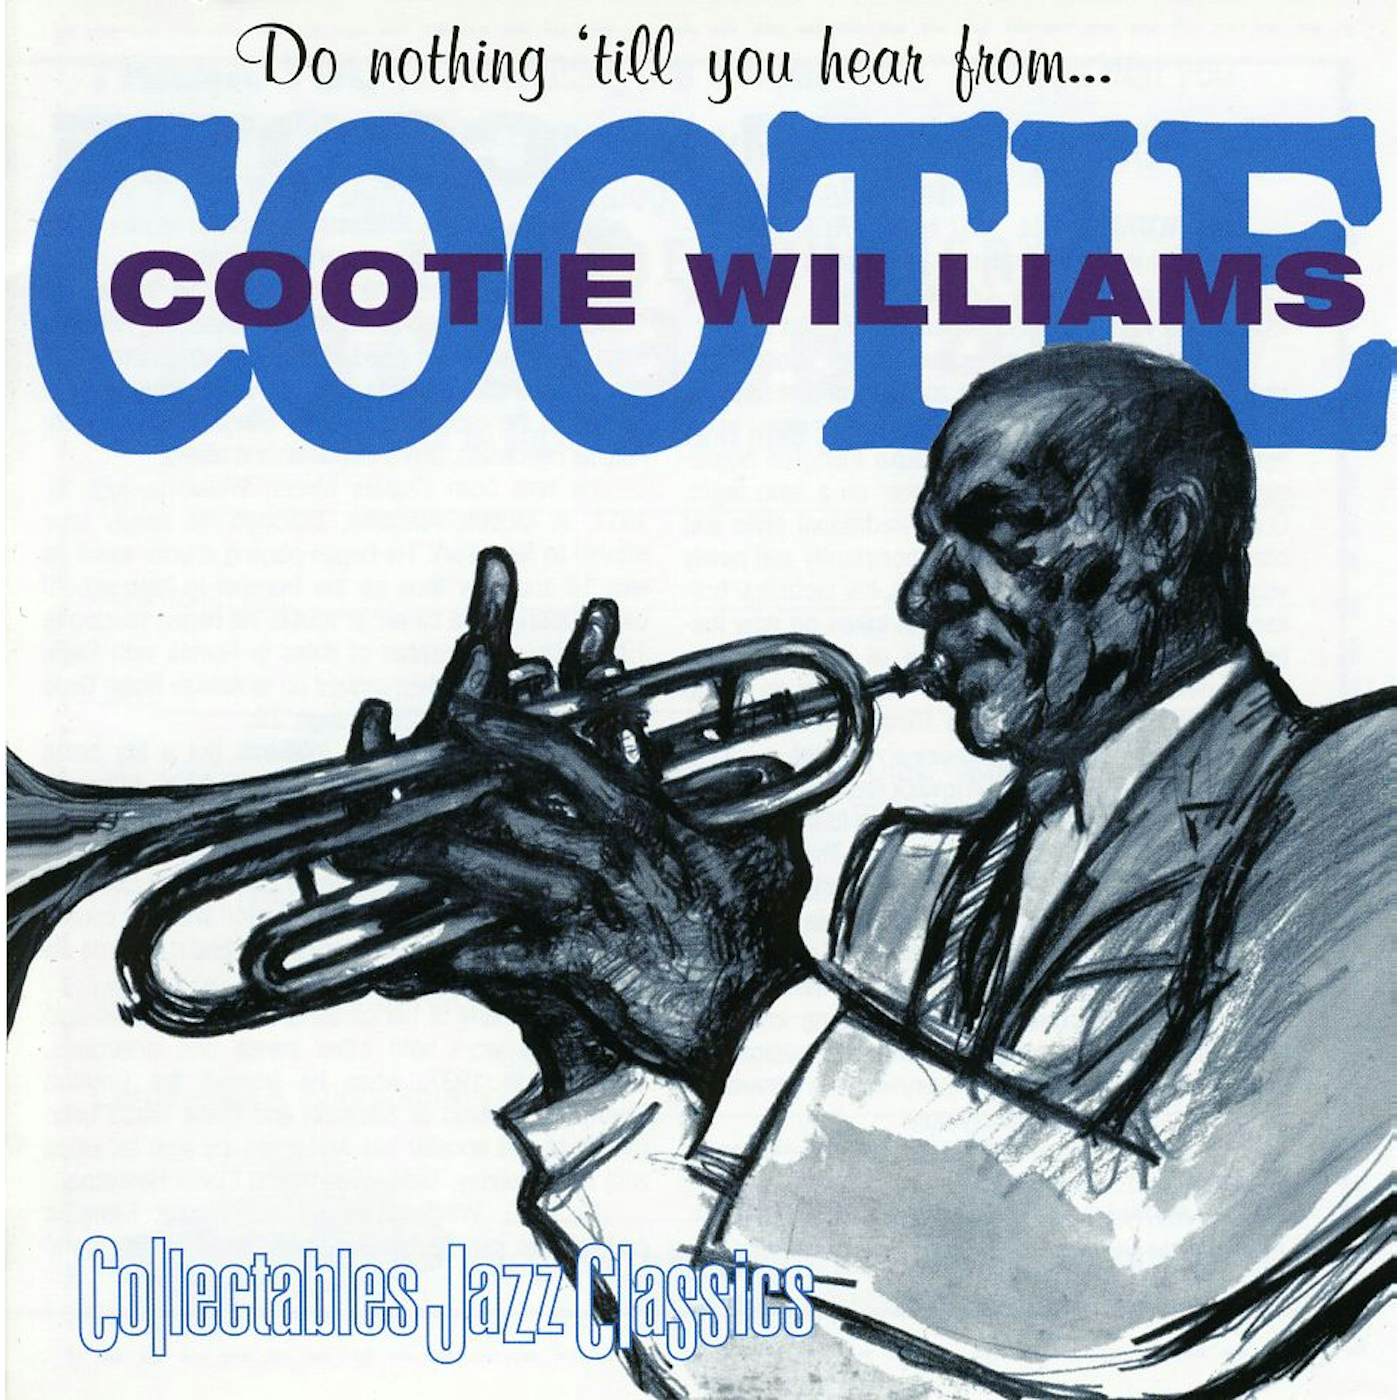 Cootie Williams DO NOTHING TILL YOU HEAR FROM ME CD